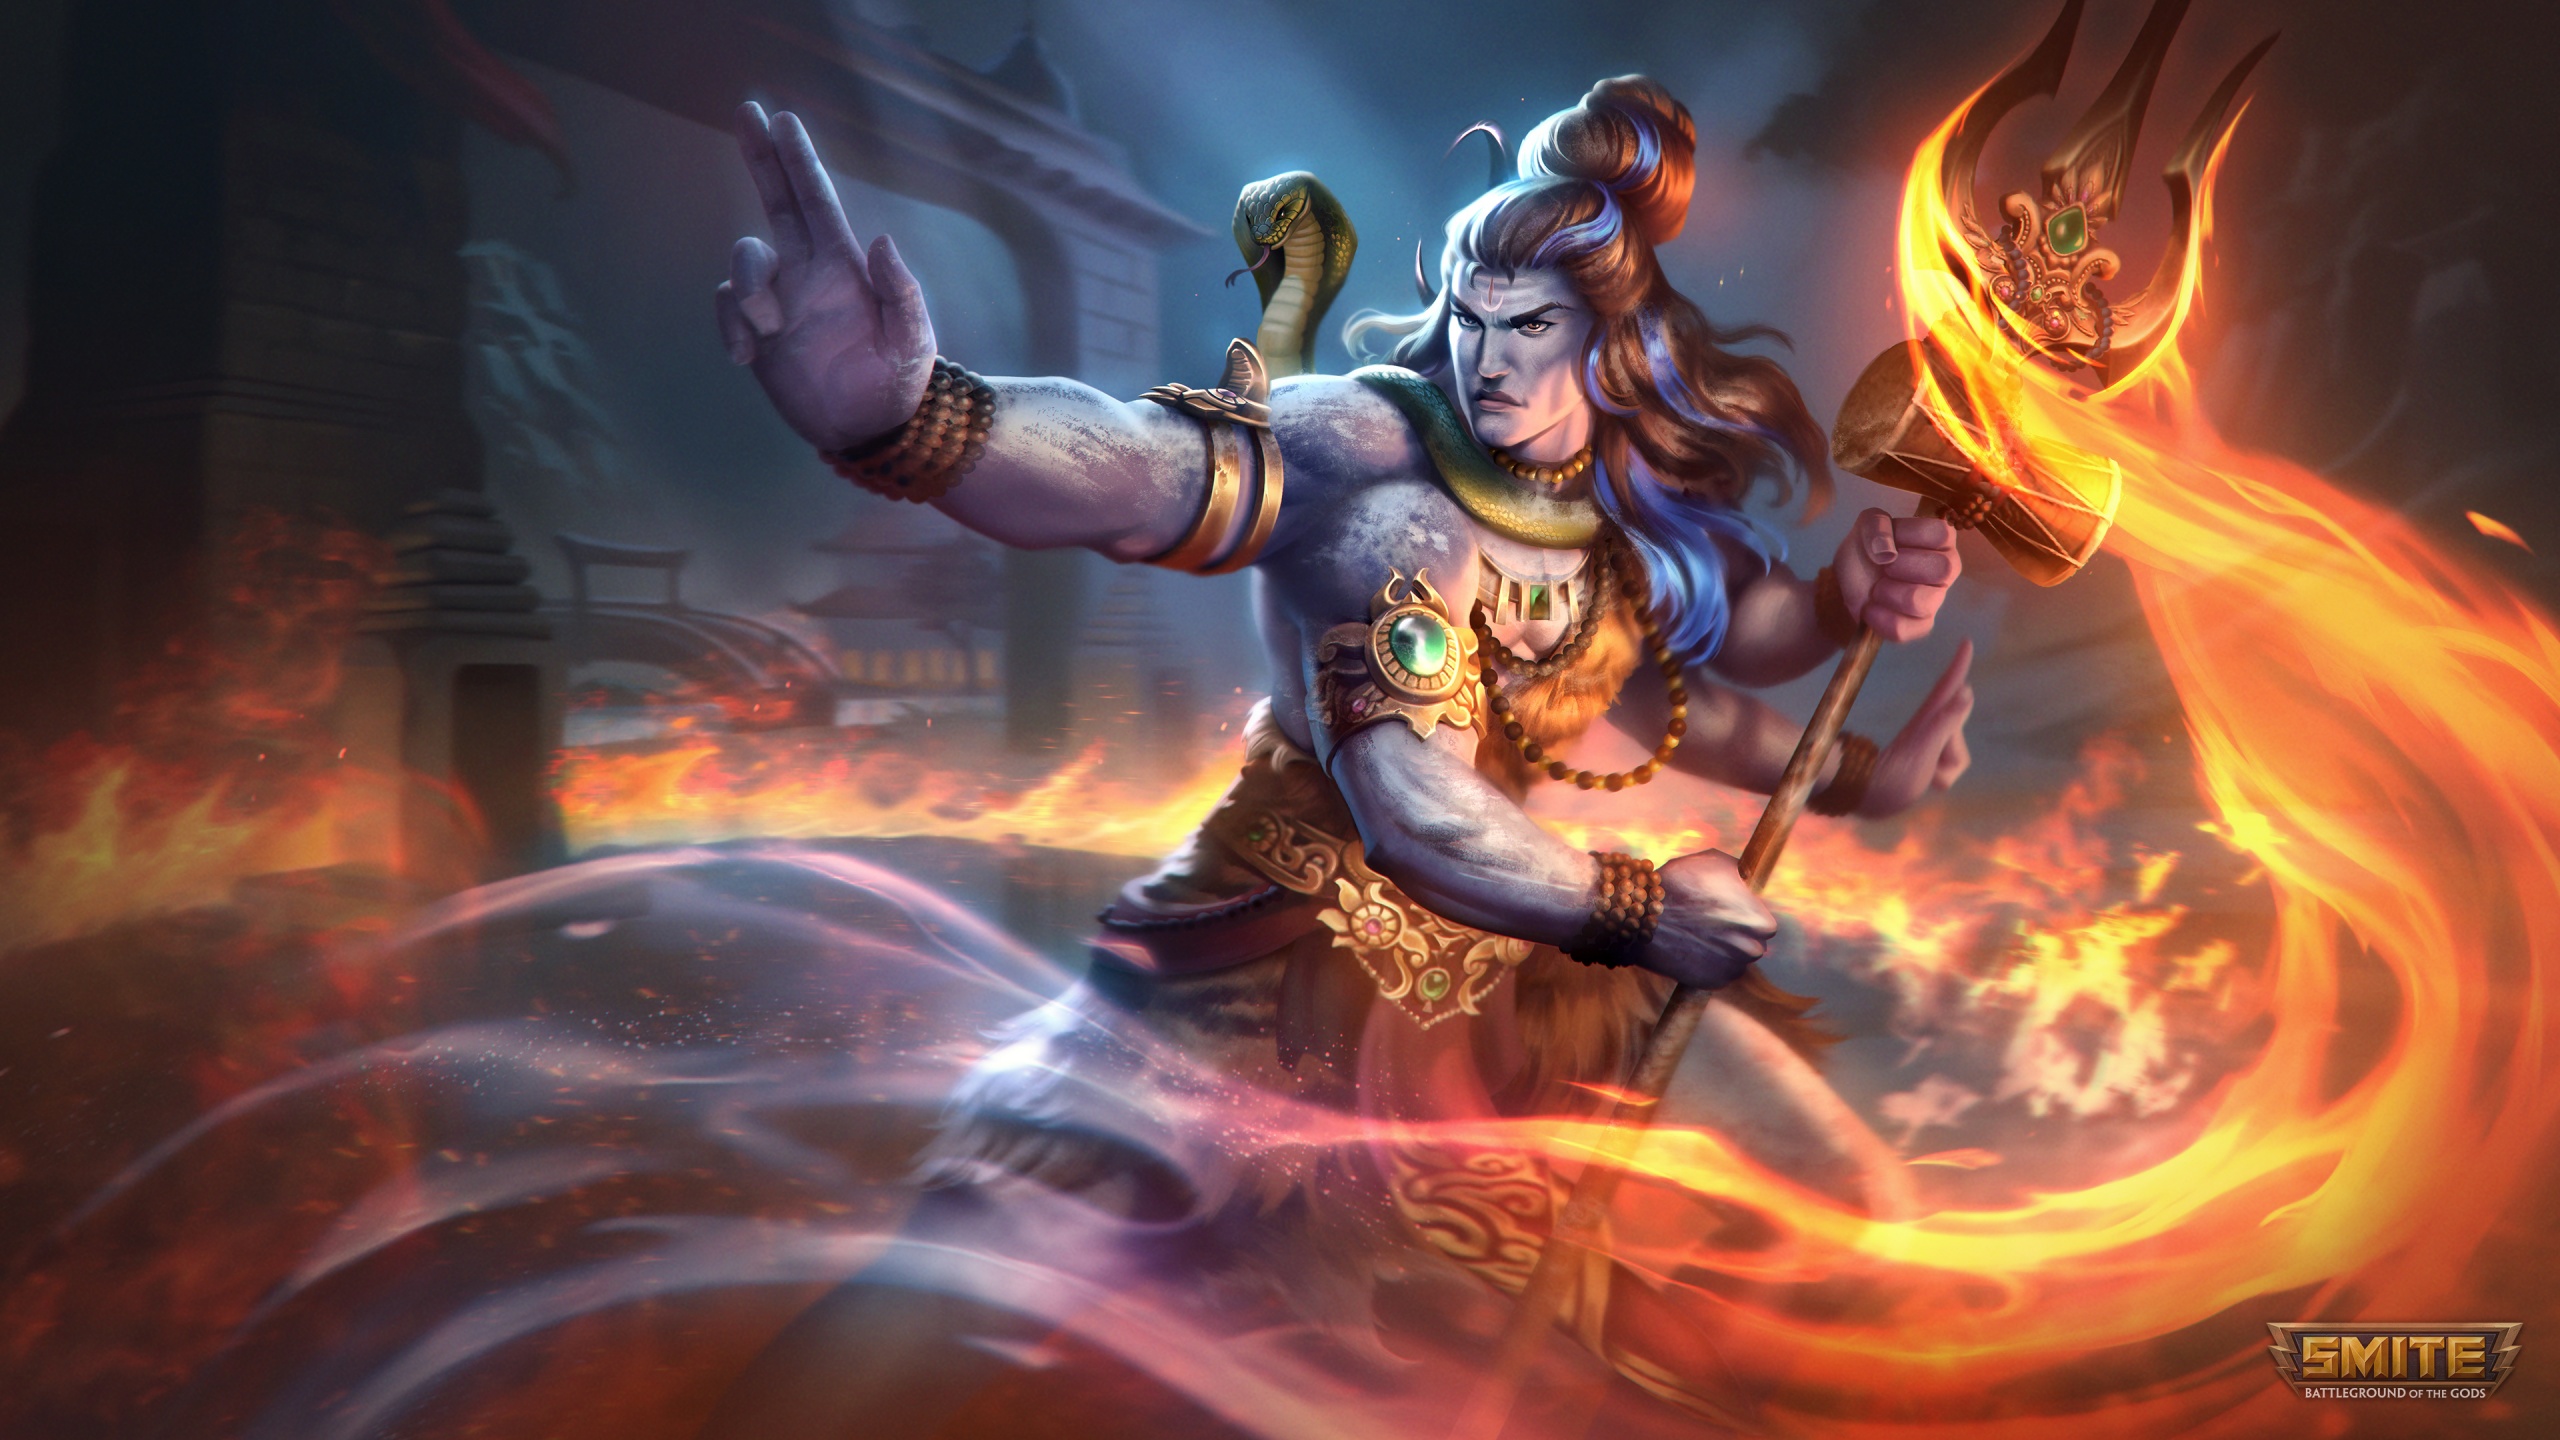 Lord Shiva Wallpaper 4K, The Destroyer, Smite, Games, #7297